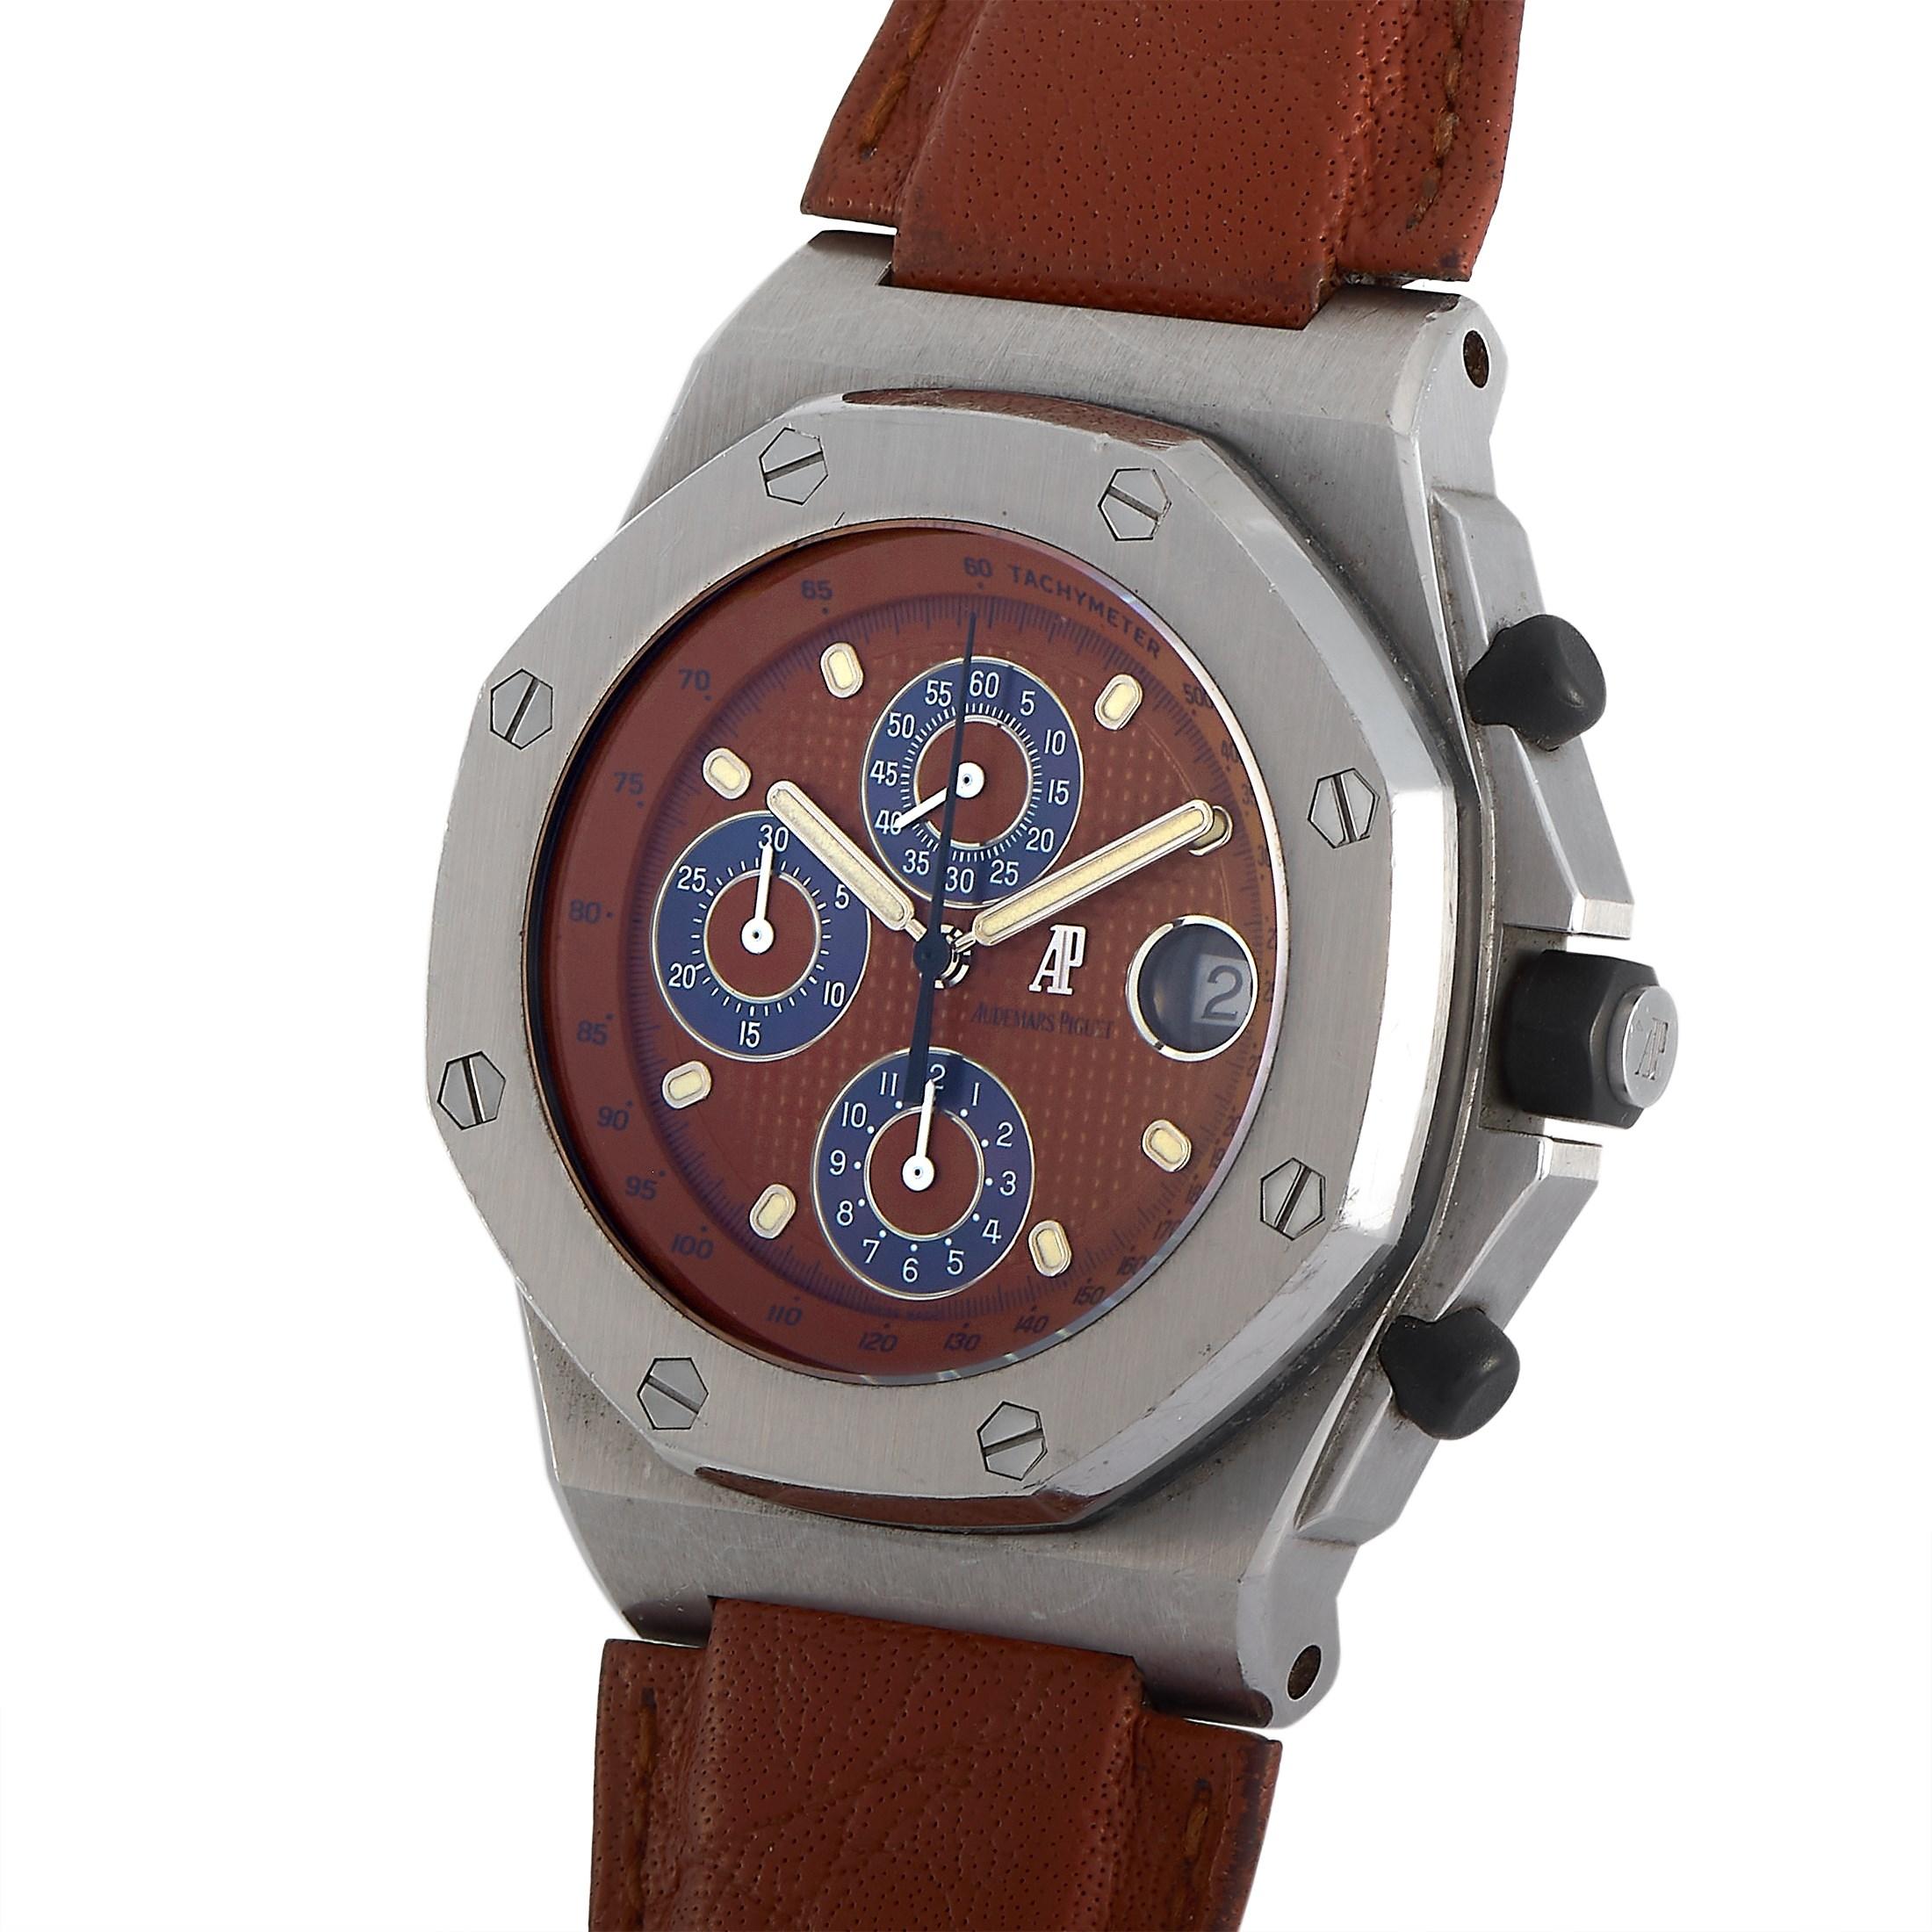 Launched in 1997, this Royal Oak ref. 25770ST was offered in eight loud and colorful dials to commemorate the 25th anniversary of Royal Oak. This one, in particular, is maroon with a matching leather strap of the same shade. This flashy yet subdued